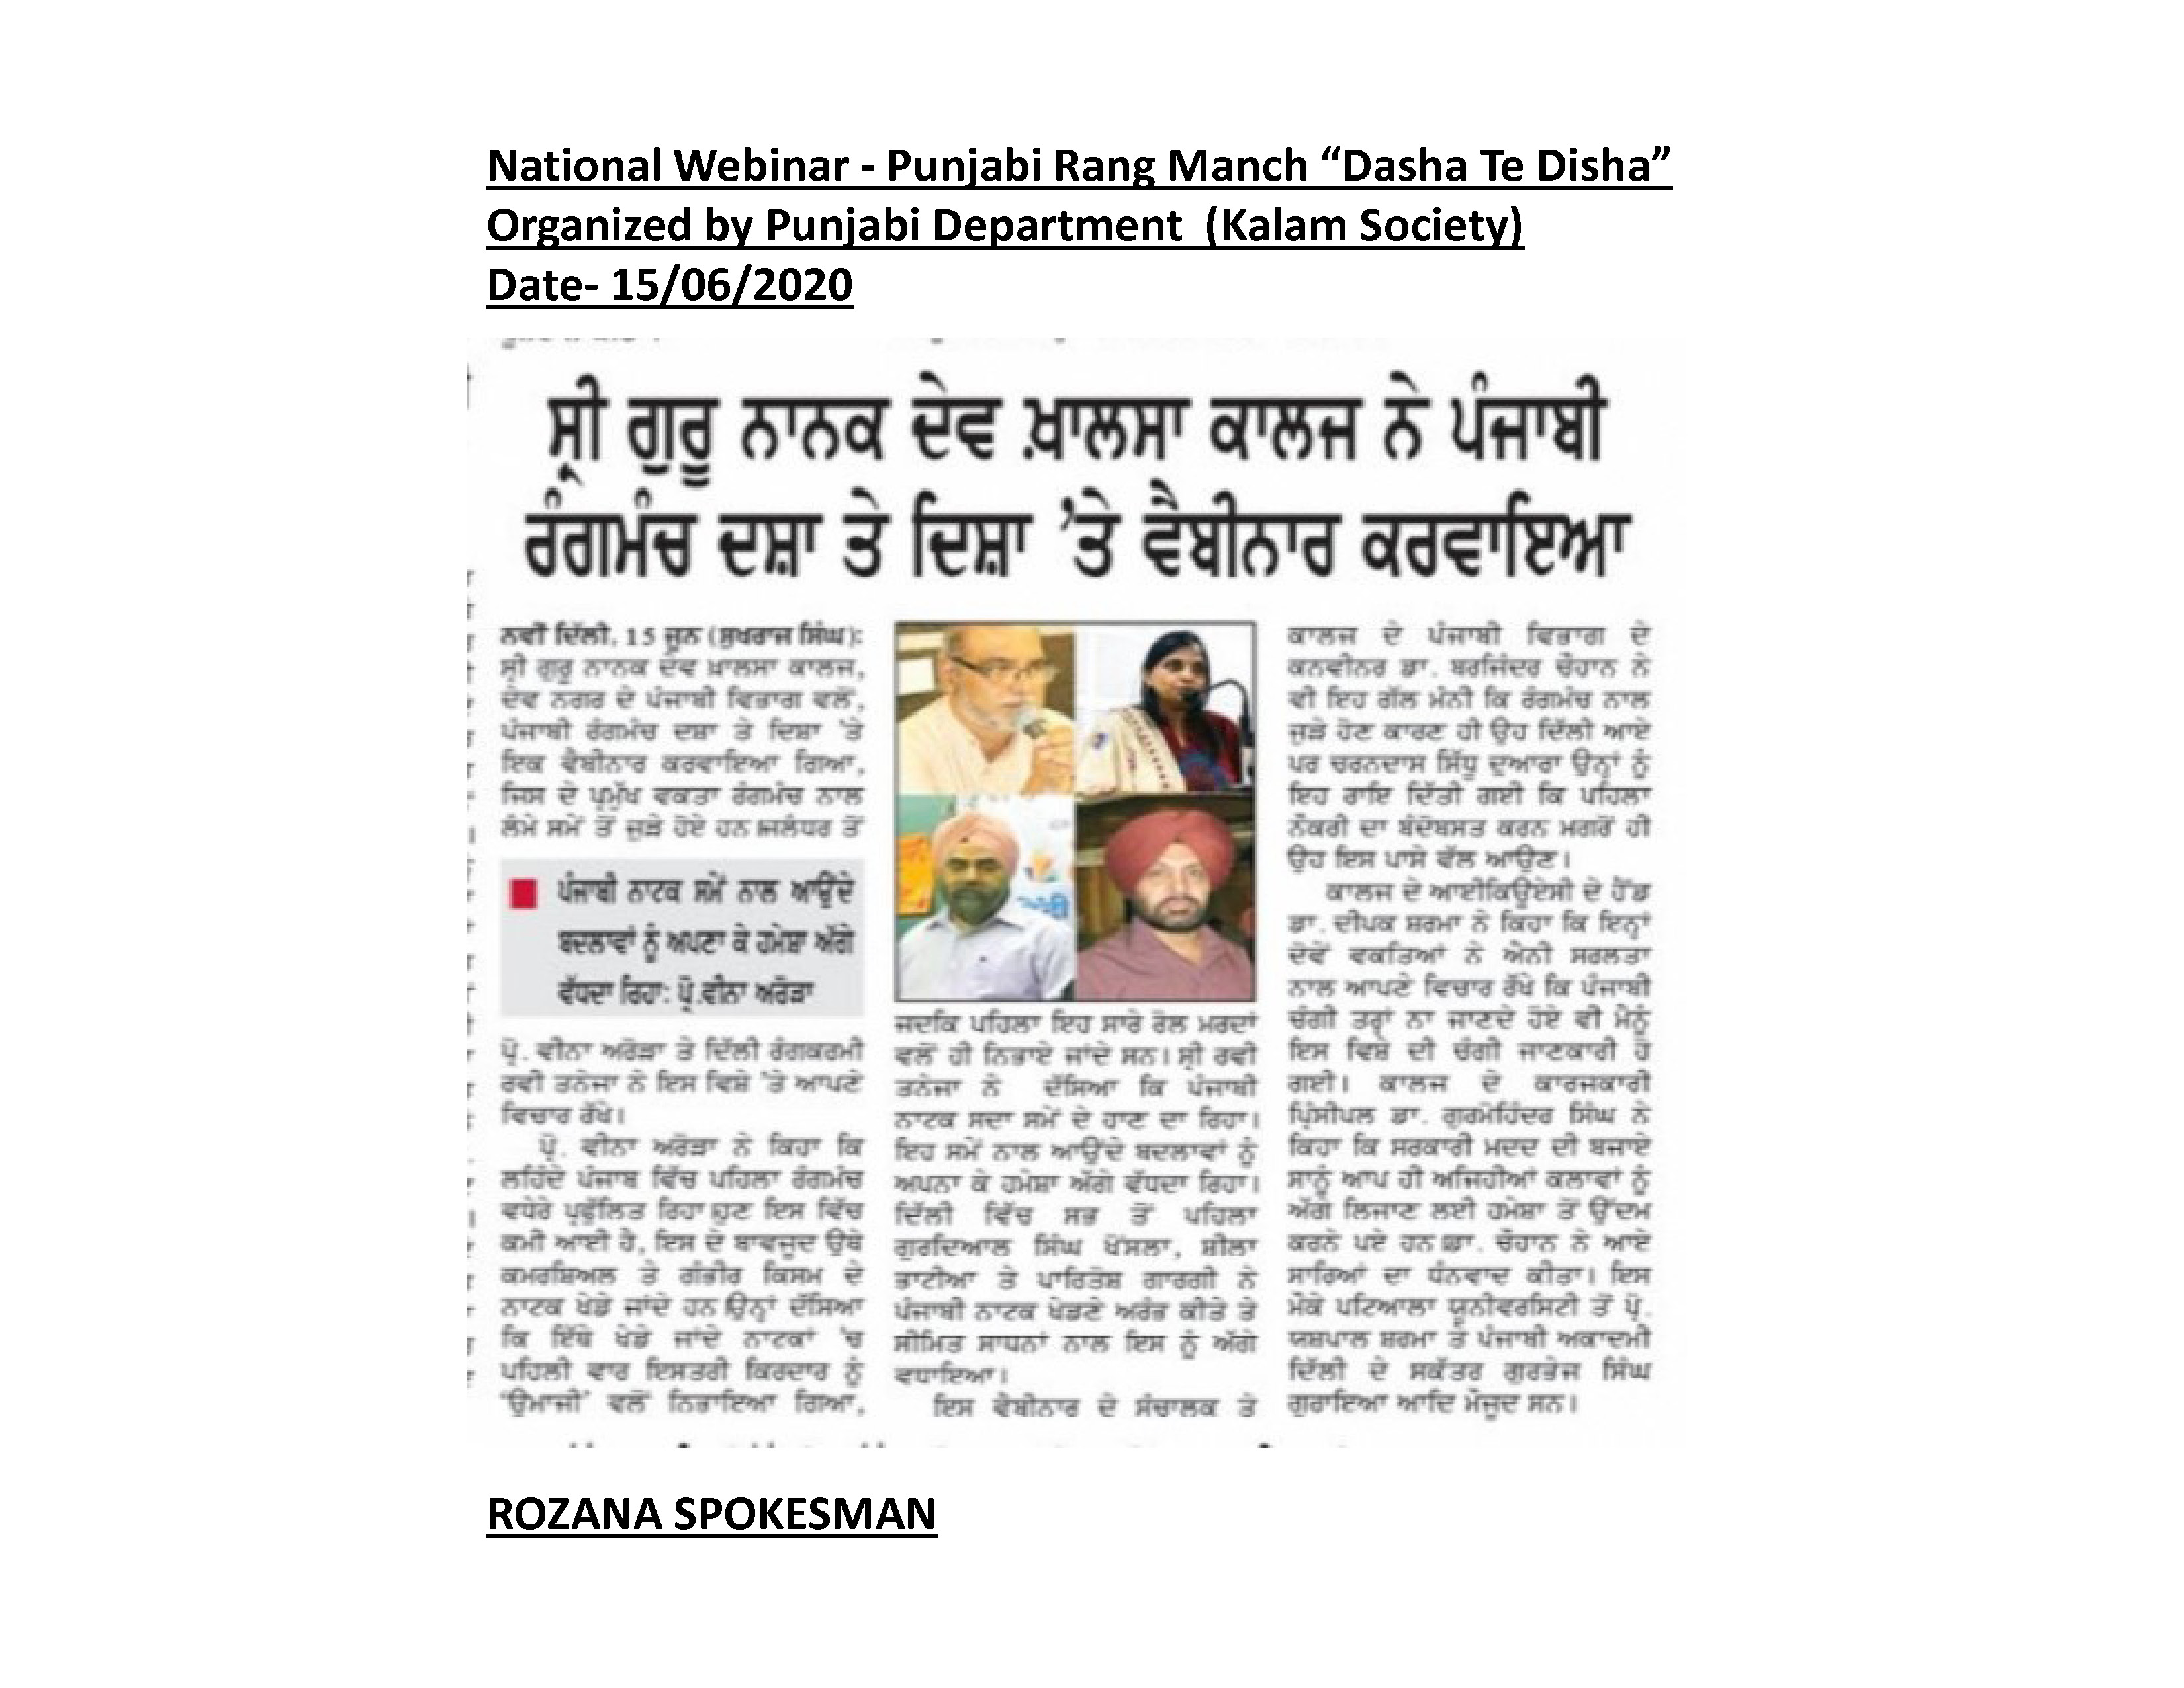 images/mediaspeaks/press clipping_Page_11.jpg